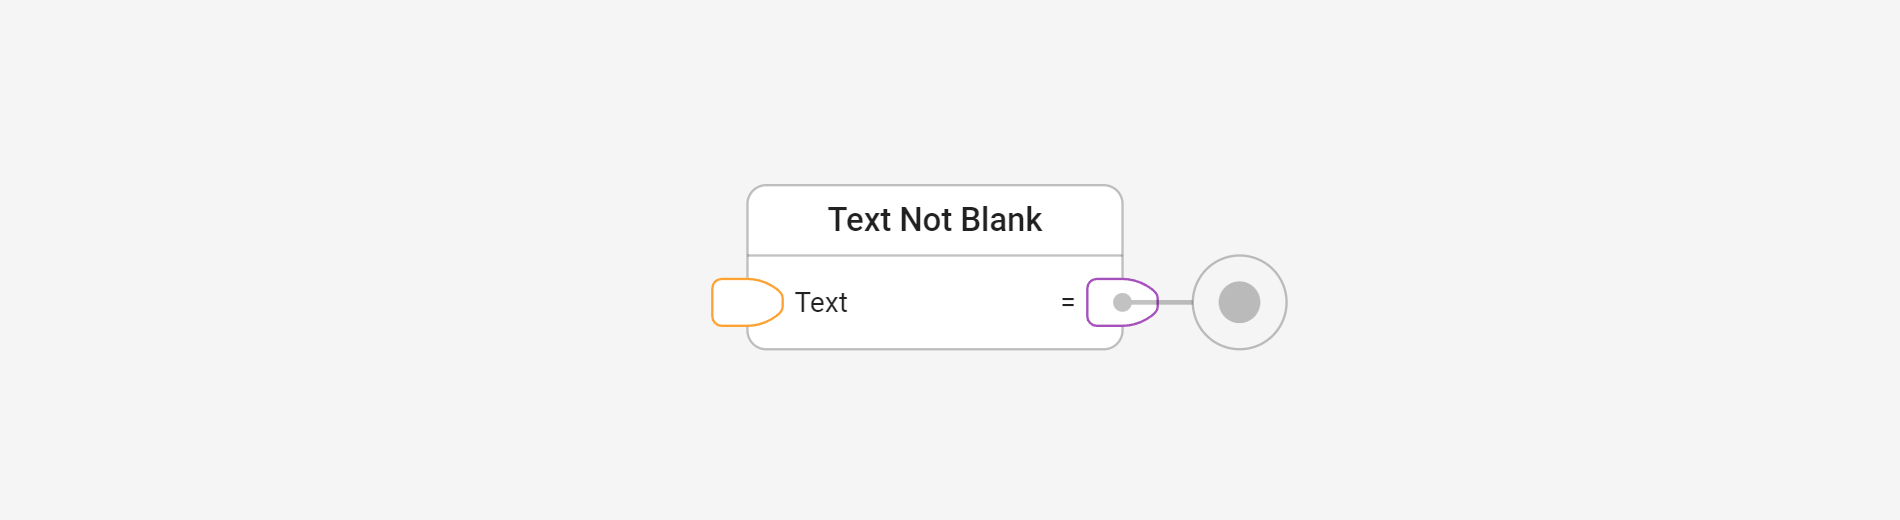 Check text is not blank